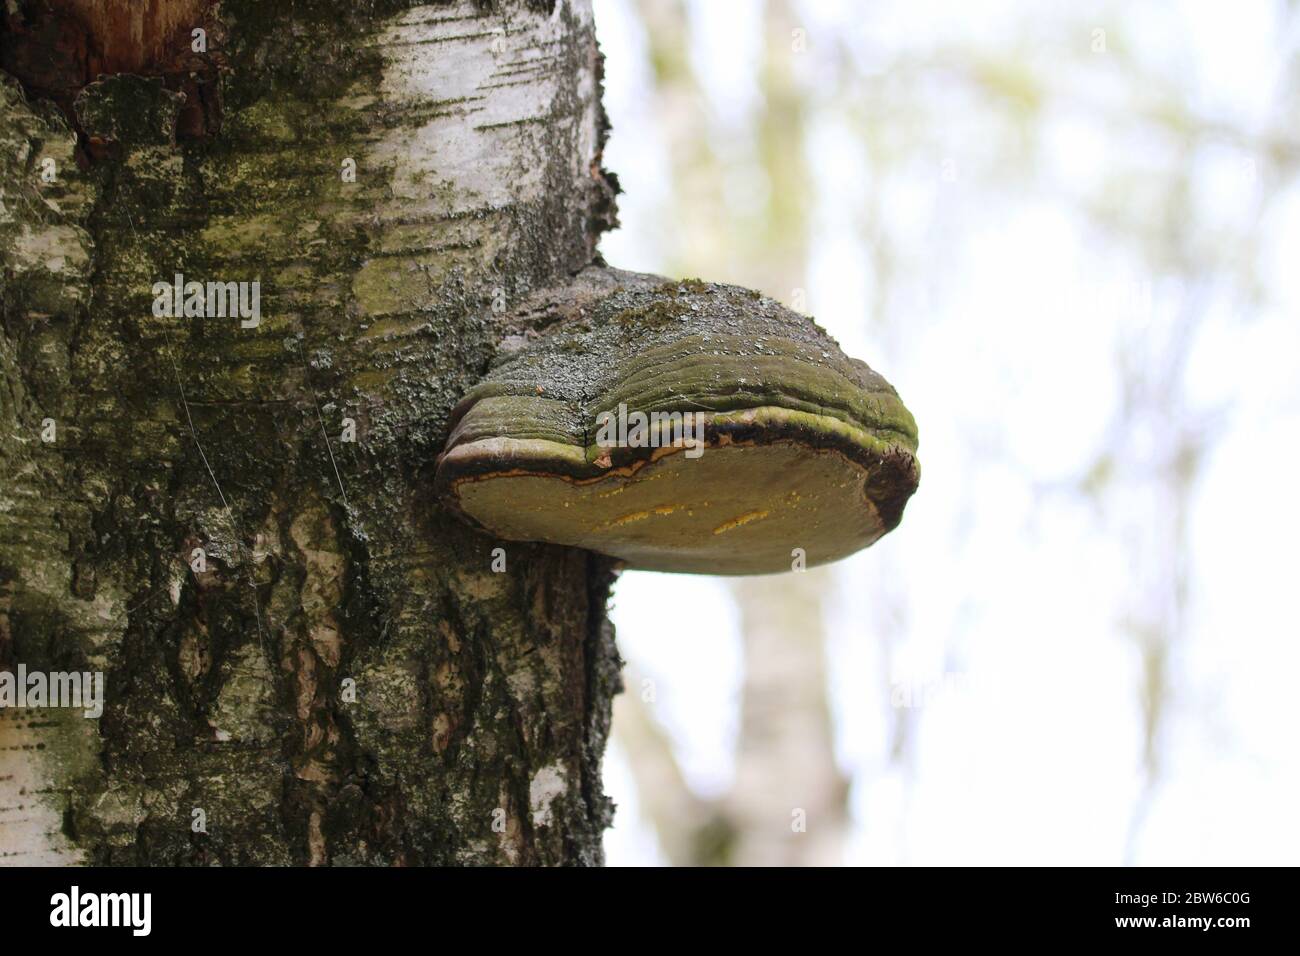 A wood mushroom on the trunk of a birch tree. Parasitic fungus on a tree. Texture of bark and moss. Stock Photo